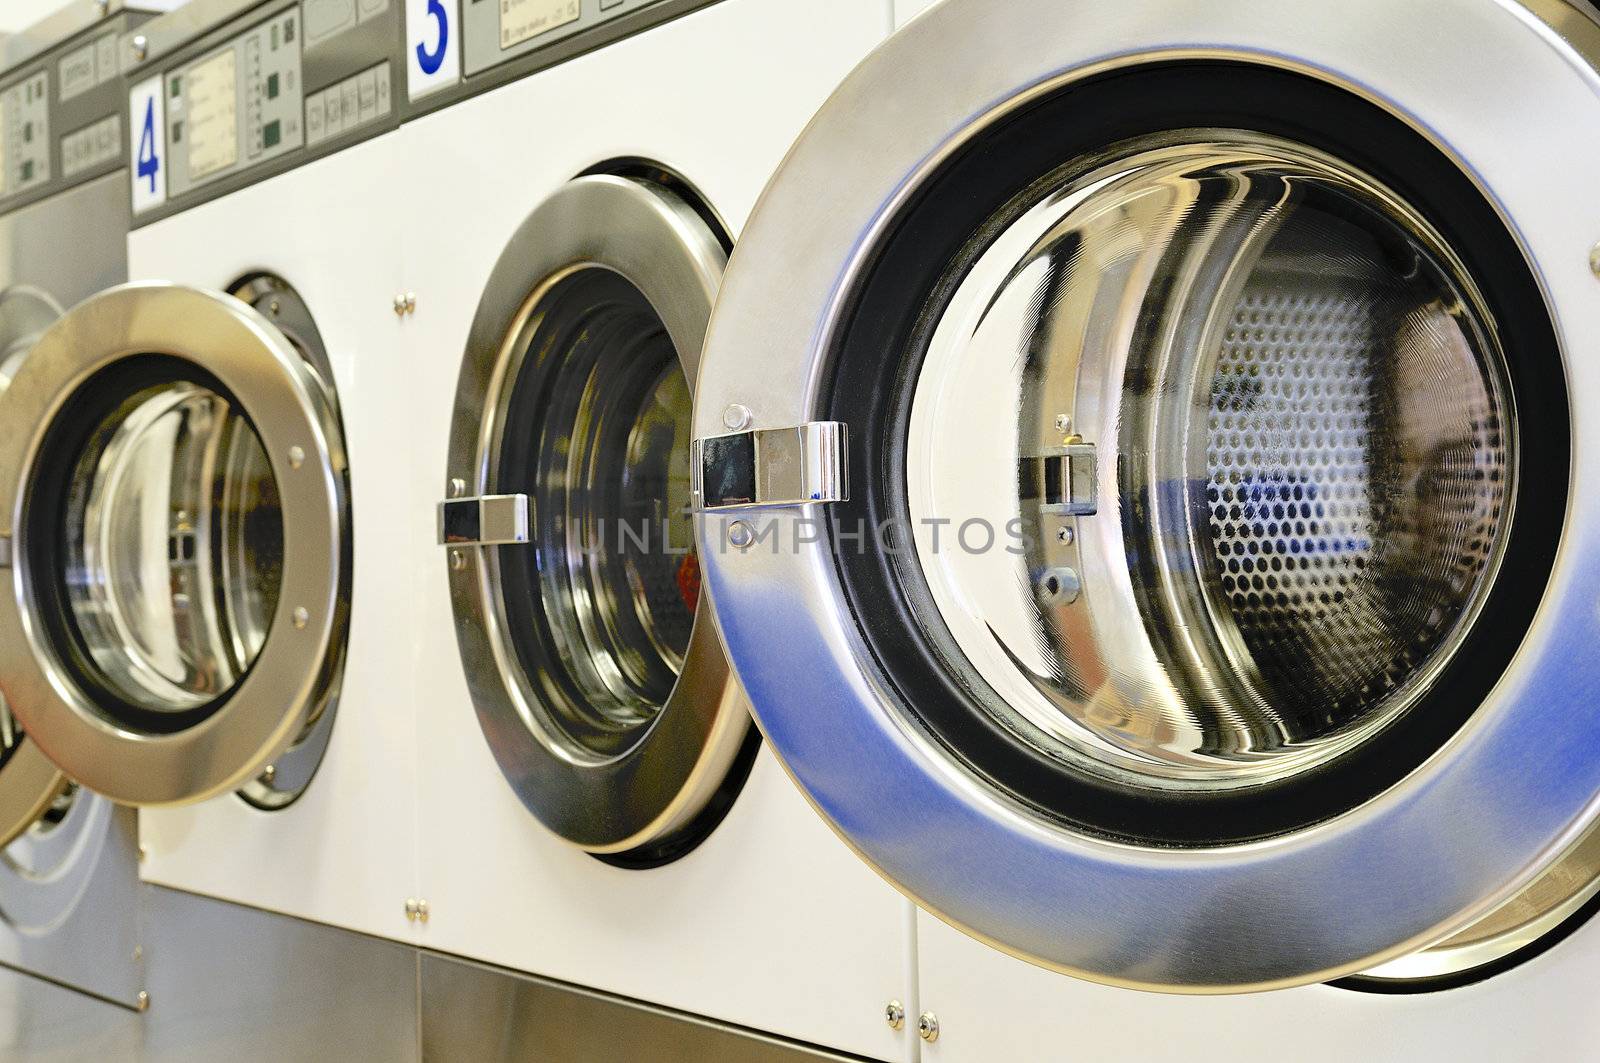 A row of industrial washing machines in a public laundromat 